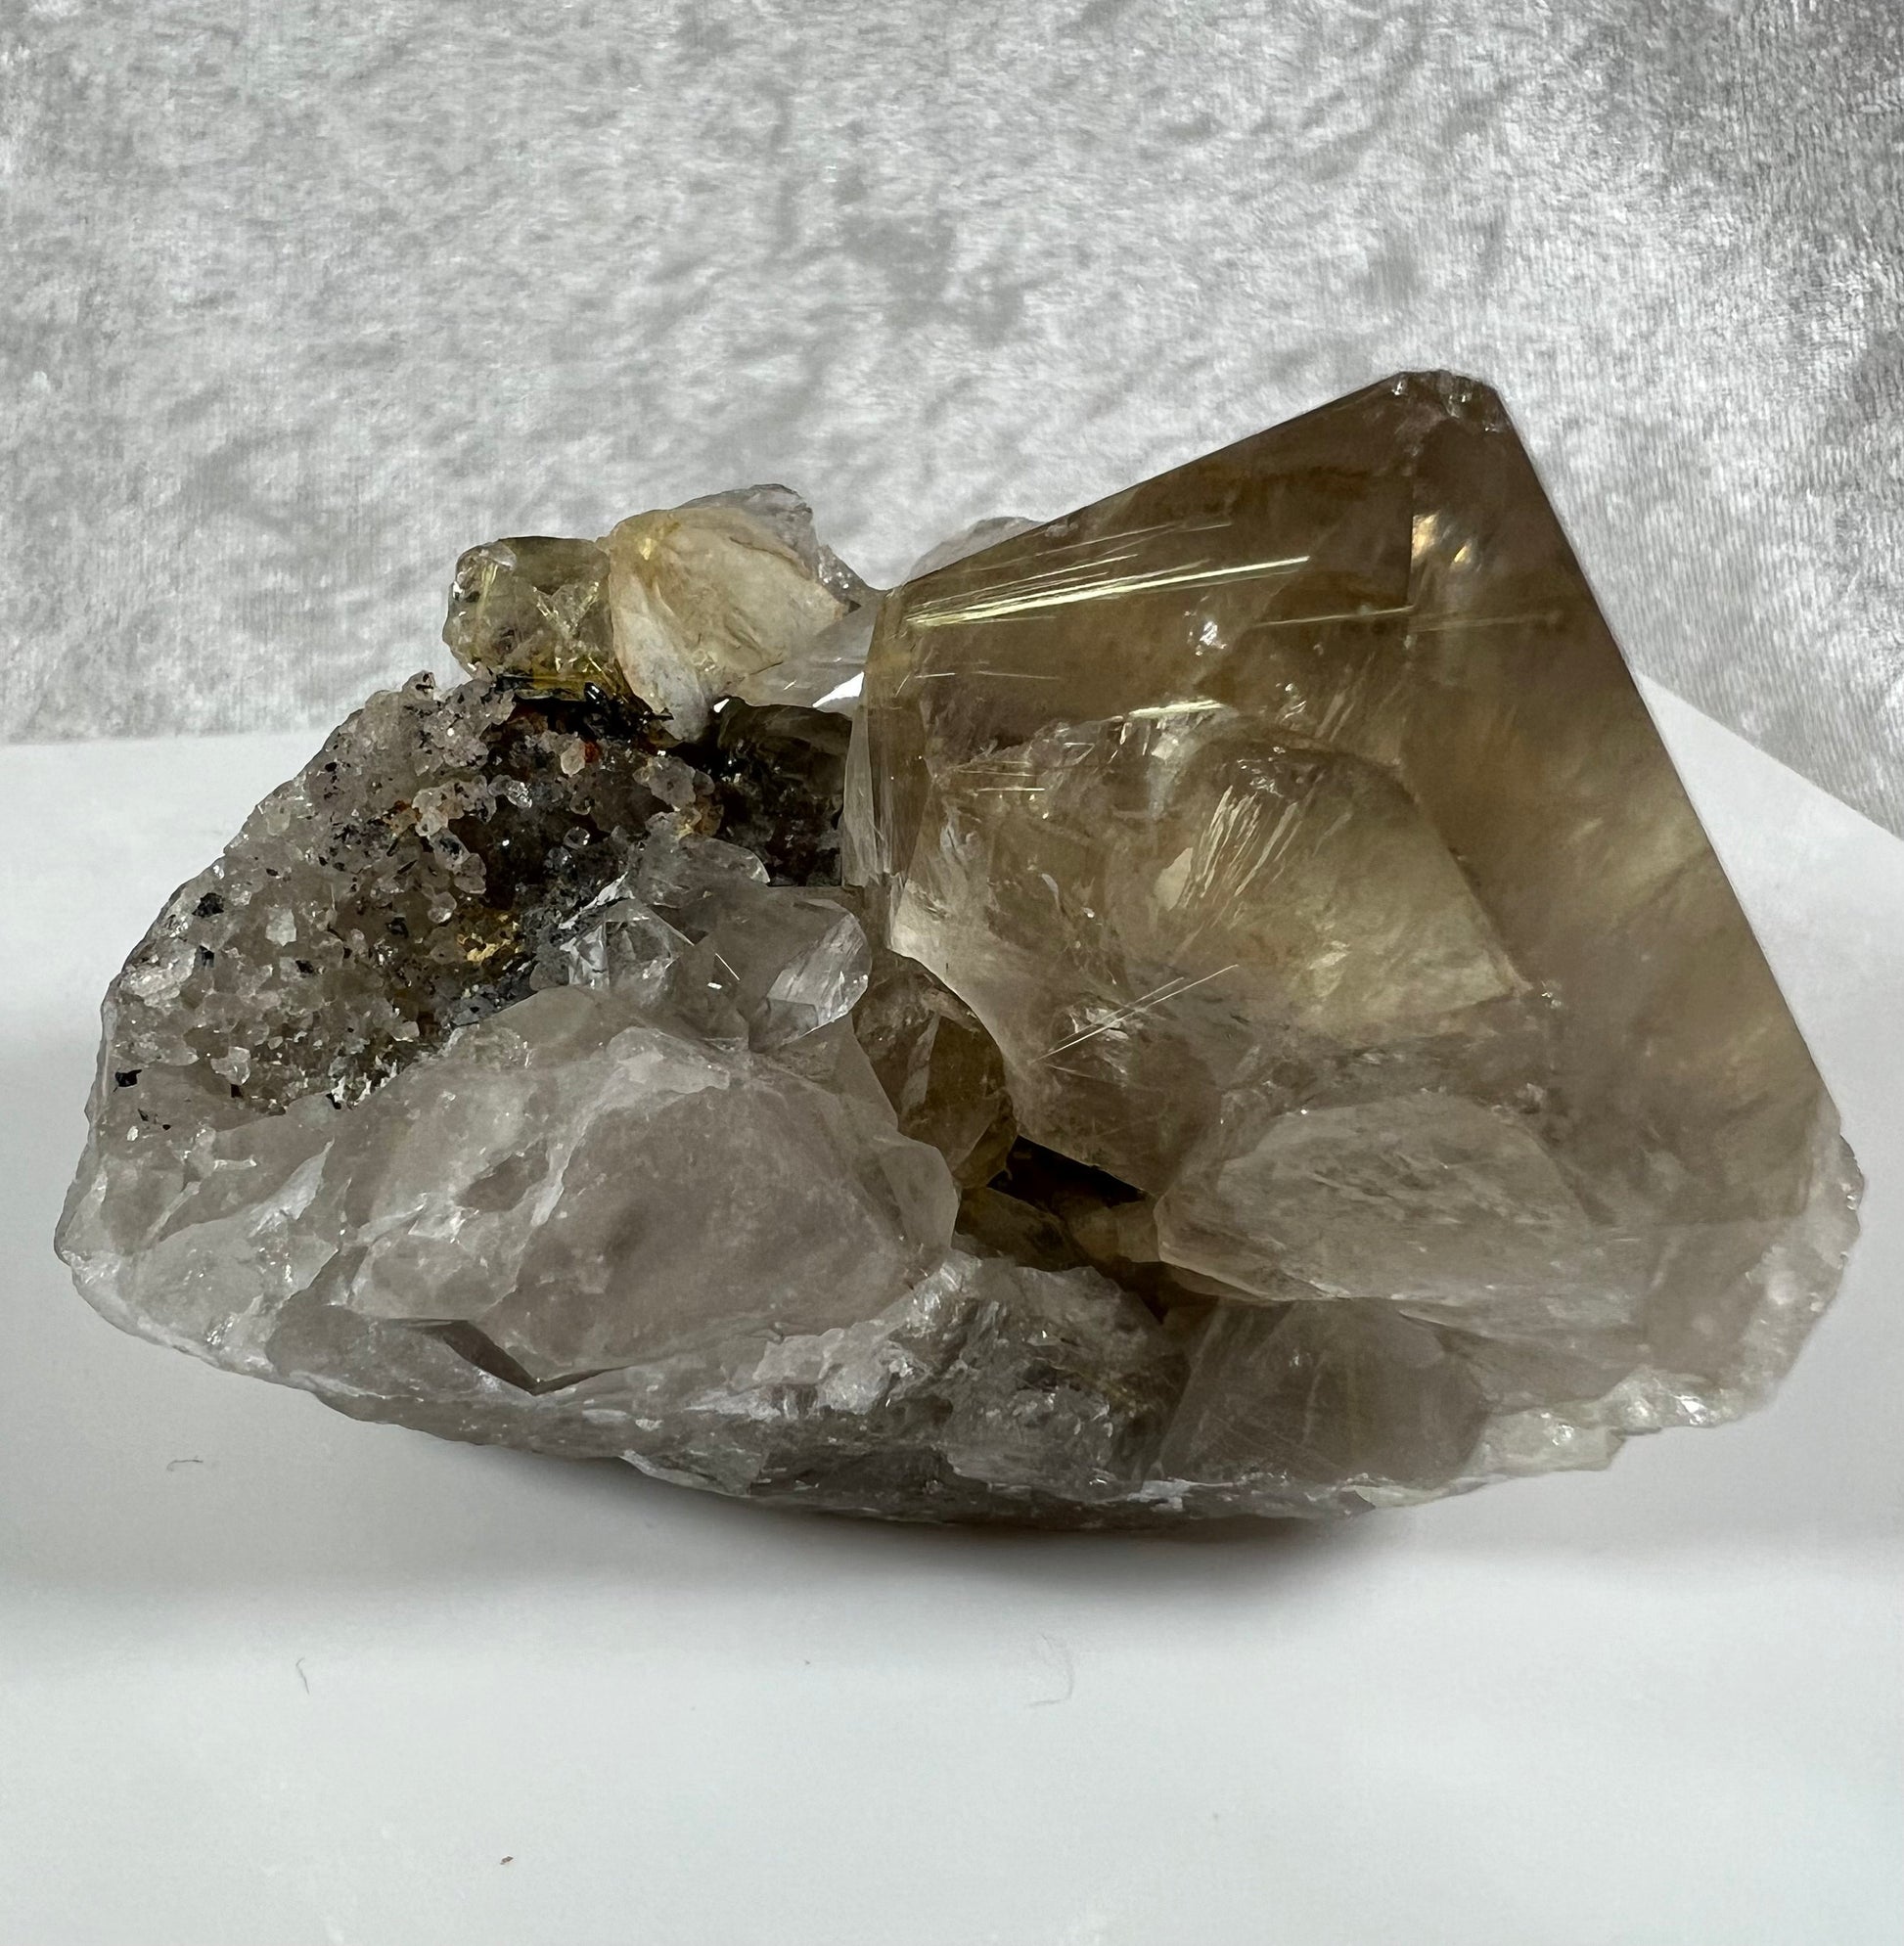 Incredible Smoky Rutile Quartz Cluster From Brazil. Very Rare One Of A Kind Specimen. Gorgeous All Natural Rutilated Quartz Display Crystal